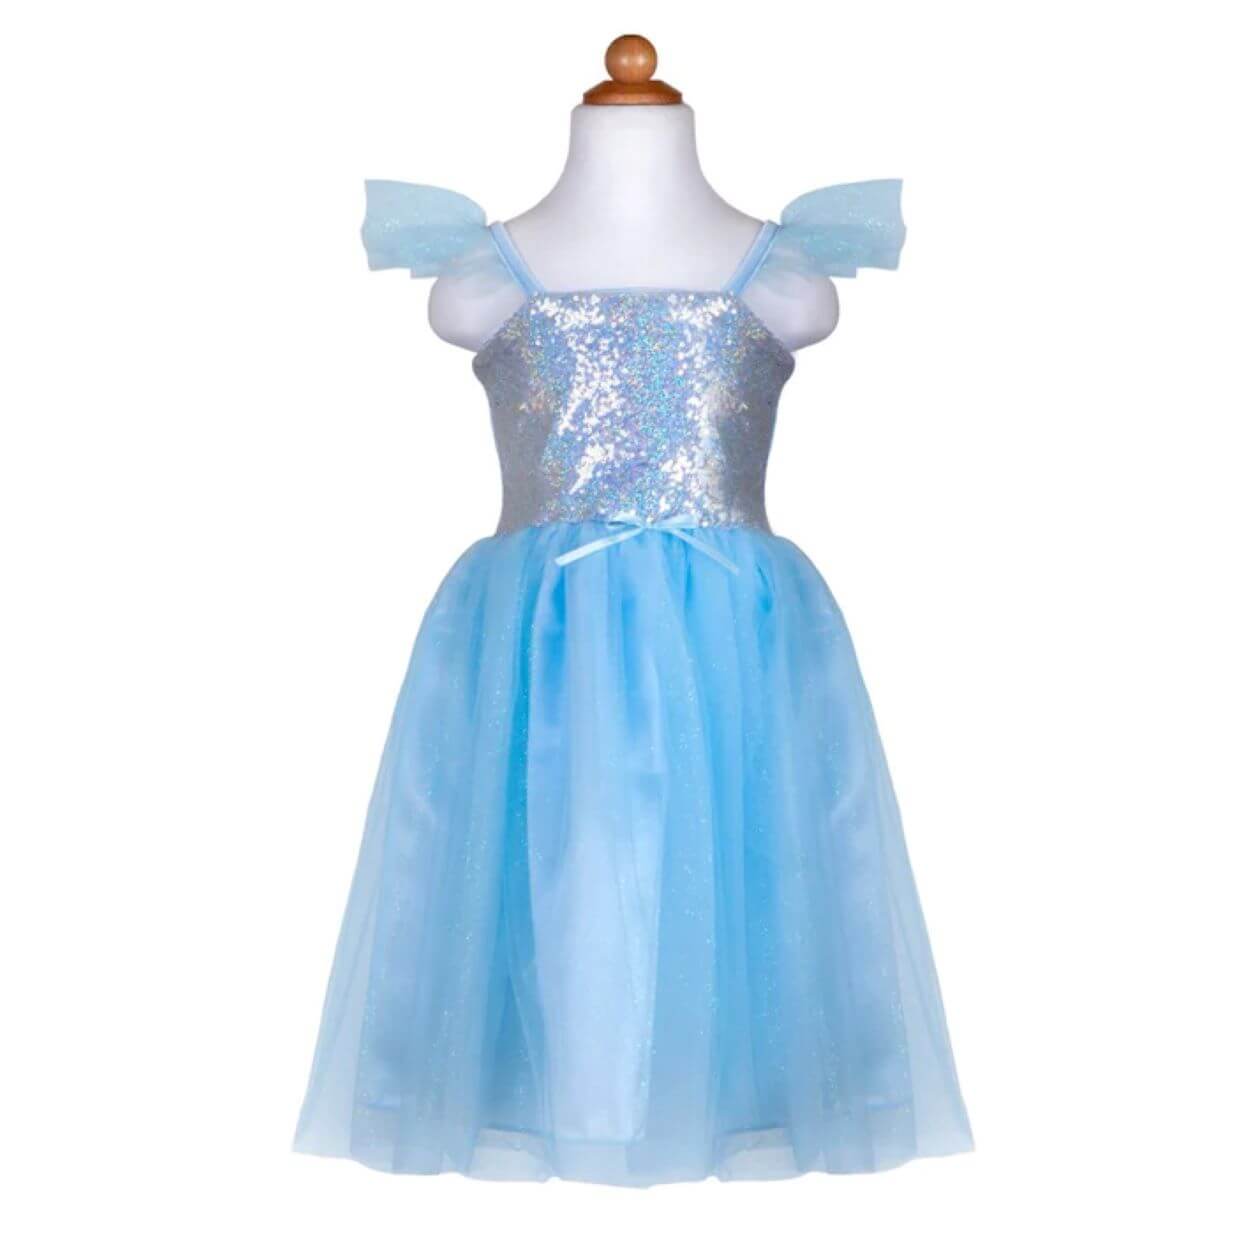 Blue girls dress with sequin bodice, spaghetti straps with tulle short sleeve and shimmery tulle full skirt